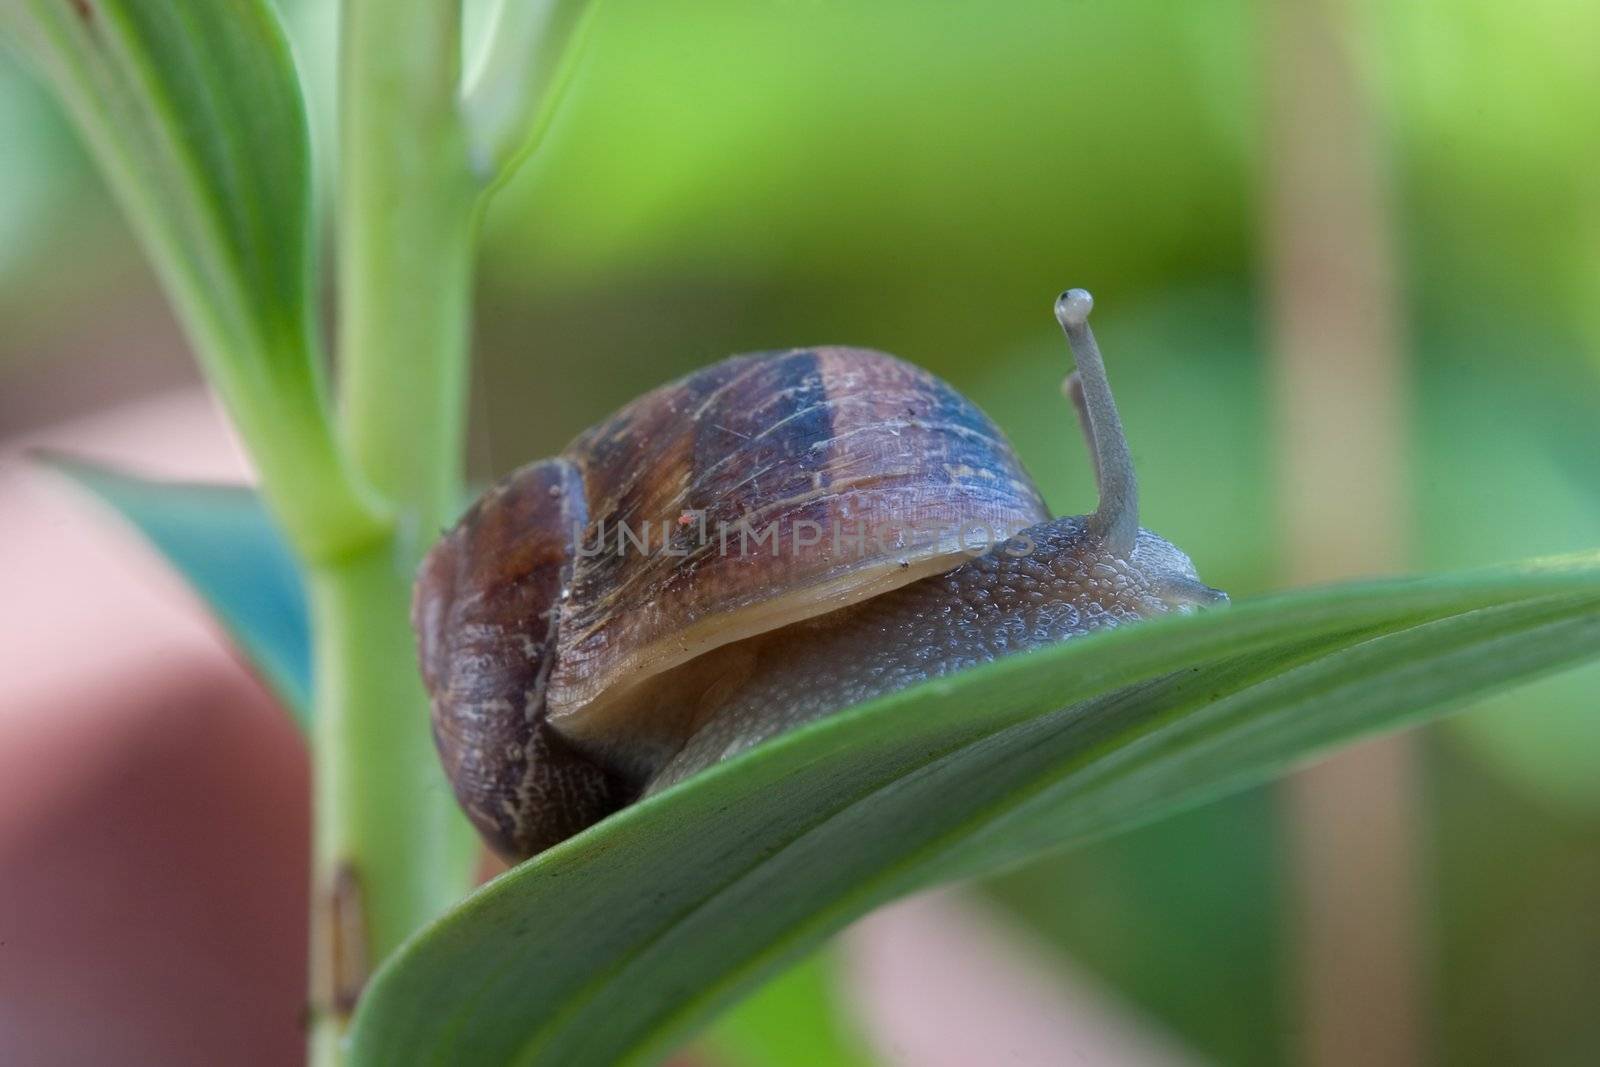 A slimy snail moves along a plant leaf with inquisitive eyes looking up. Snails and slugs are gastropods, which make up the largest class of mollusks with more than 60,000 species. Most of these species can be identified by their shells. Snails are found everywhere except arctic and antarctica.  Species  can live on land, fresh water or sea.   When snails move, they stick out their heads revealing two pairs of tentacles. The taller pair of tentacles are where snails eyes are located, the lower pair of tentacles are for sense of smell and touch.  Focus on near side of snail.